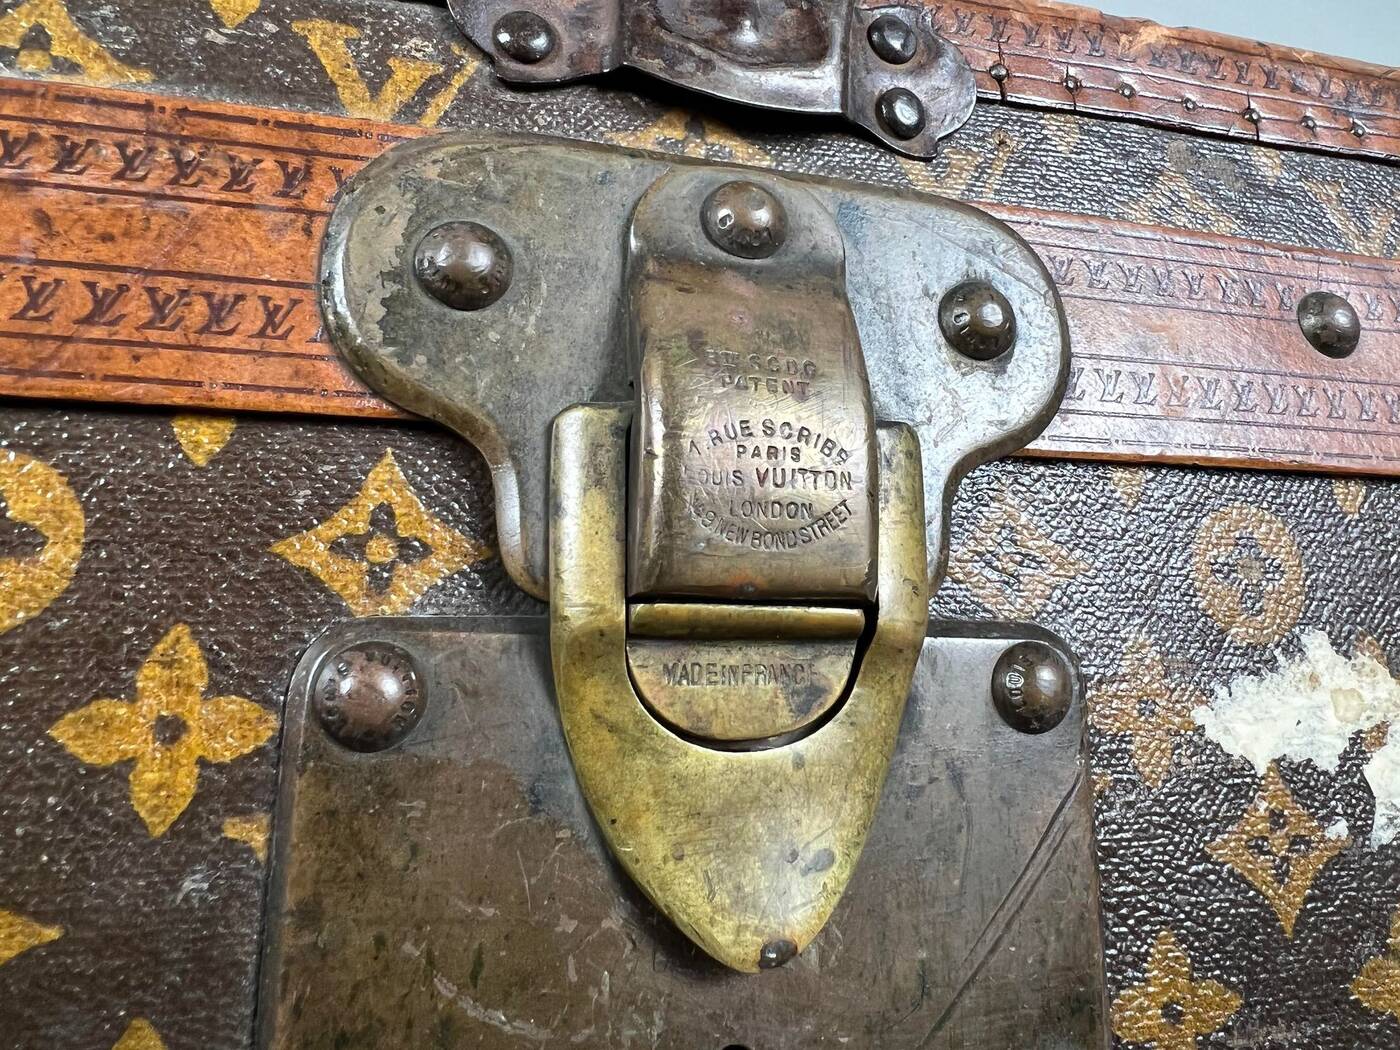 Toronto man finds rare Louis Vuitton suitcase from 1890s in